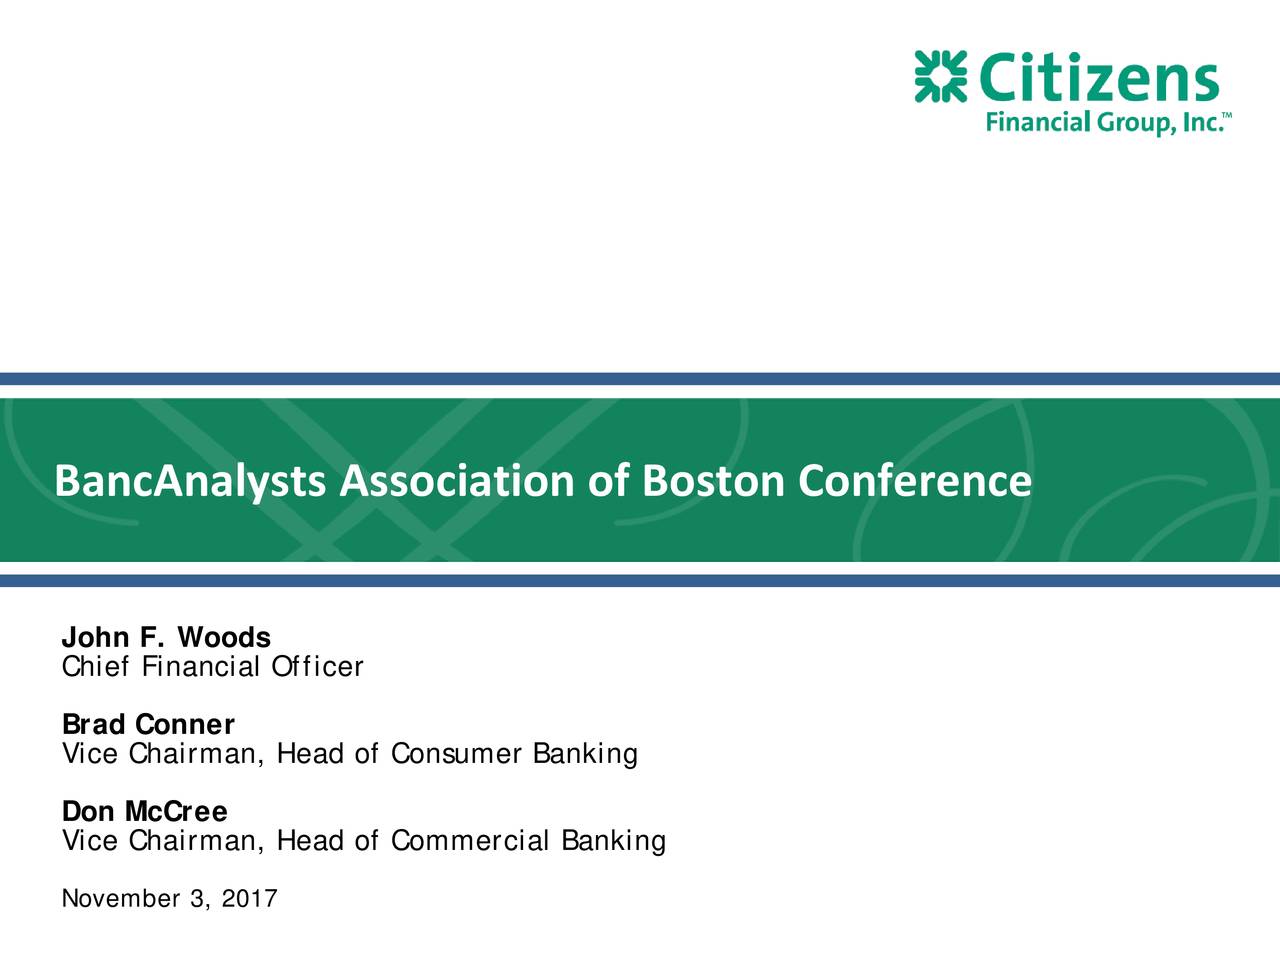 Citizens Financial (CFG) Presents At 36th Annual BancAnalysts